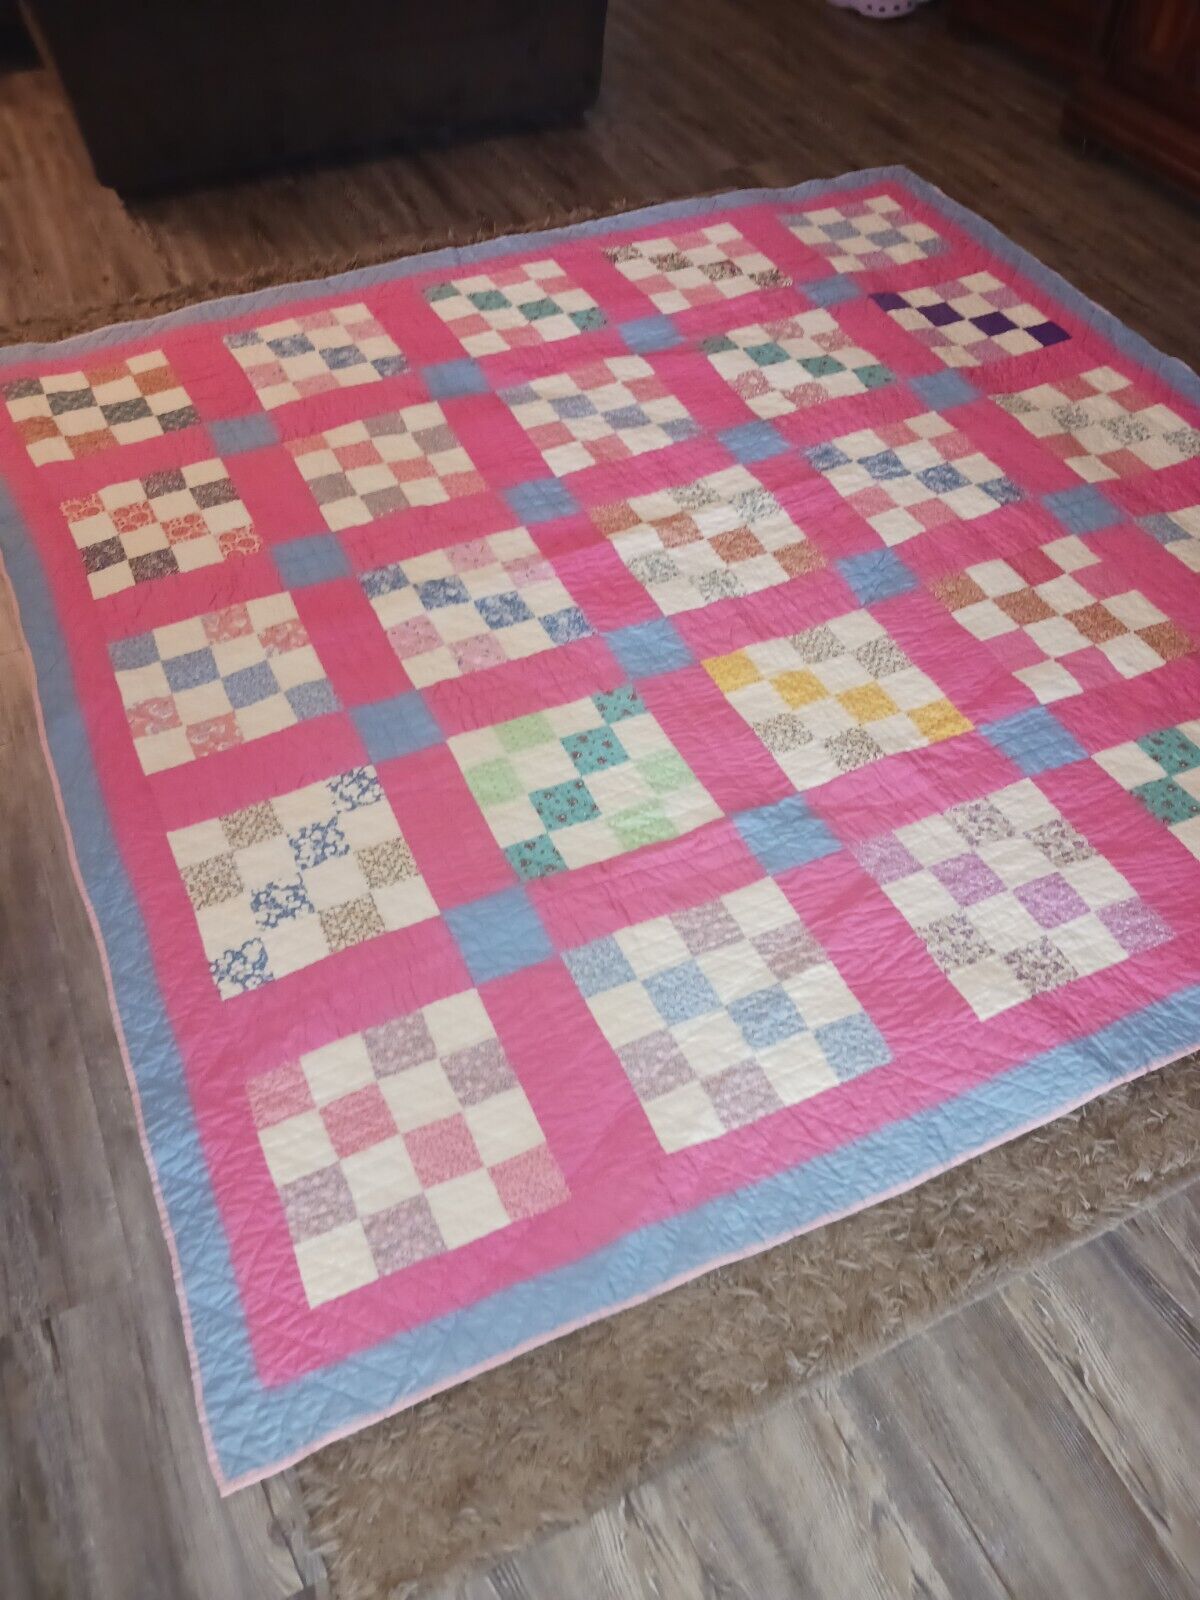 FINE VINTAGE FARMHOUSE Style COUNTRY Patchwork EMBROIDERY  QUILT Pink Large King